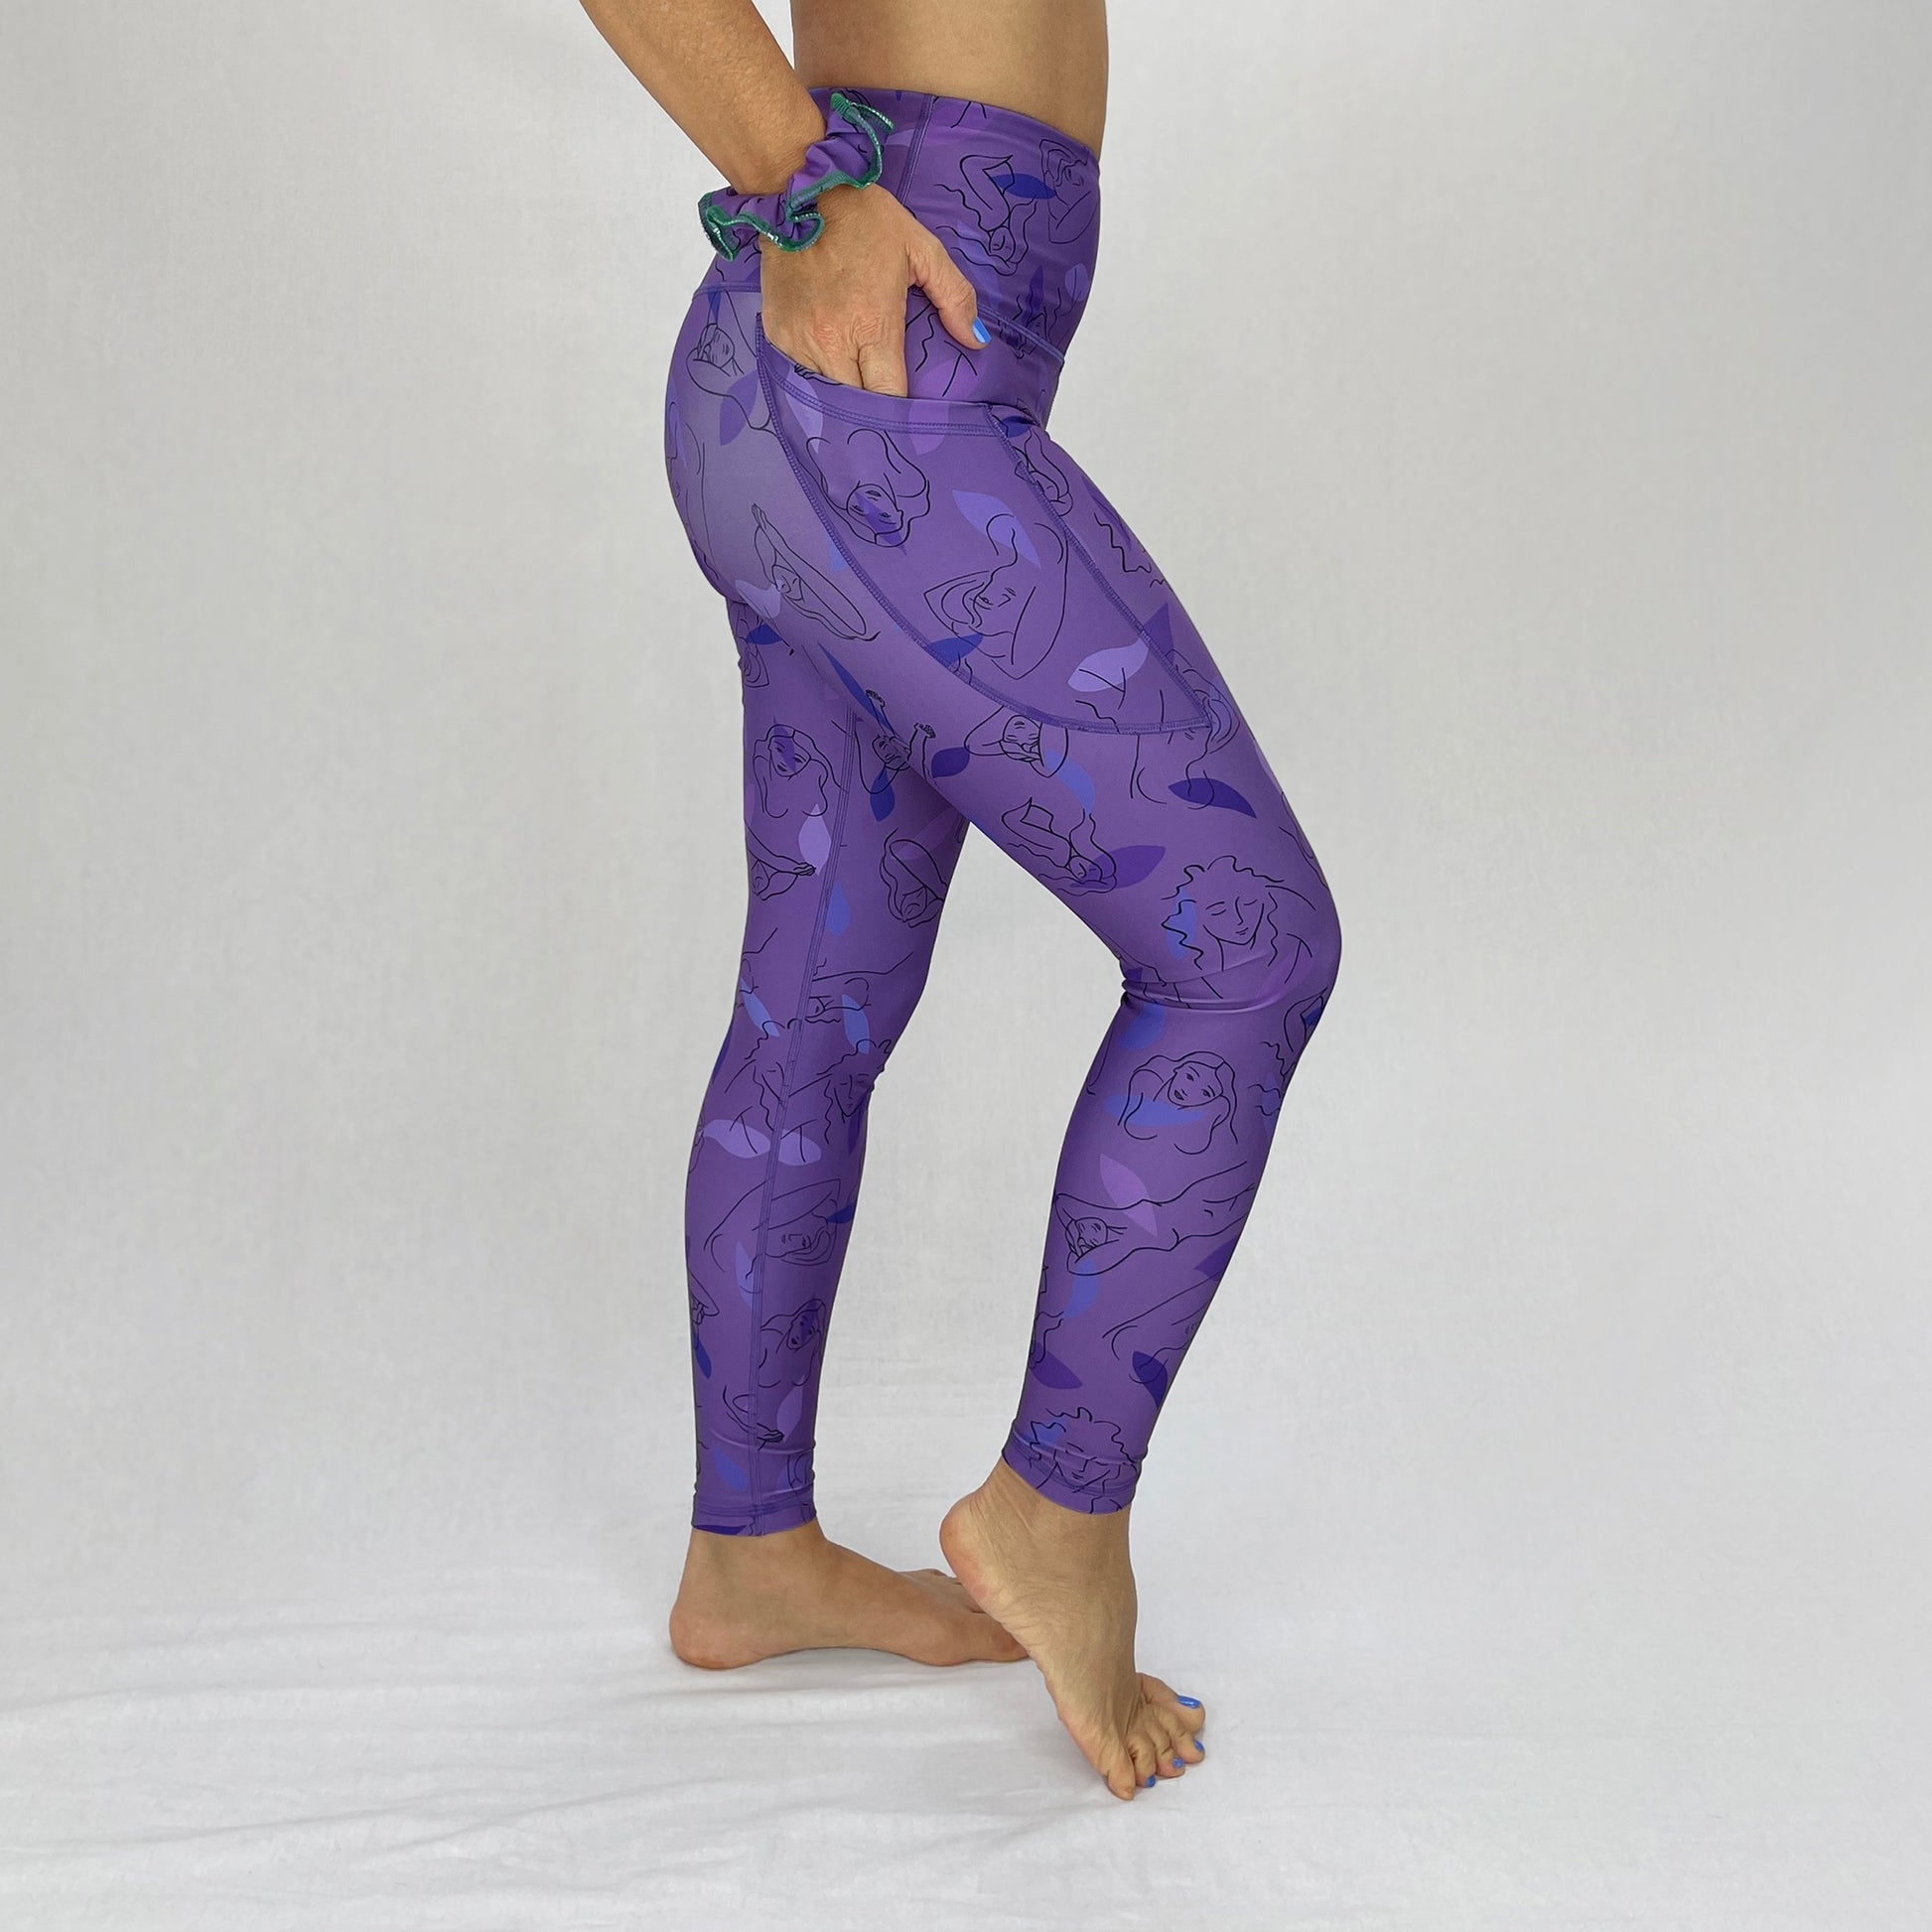 colourful high rise leggings with pockets made sustainably from recycled materials - purple women - side pocket